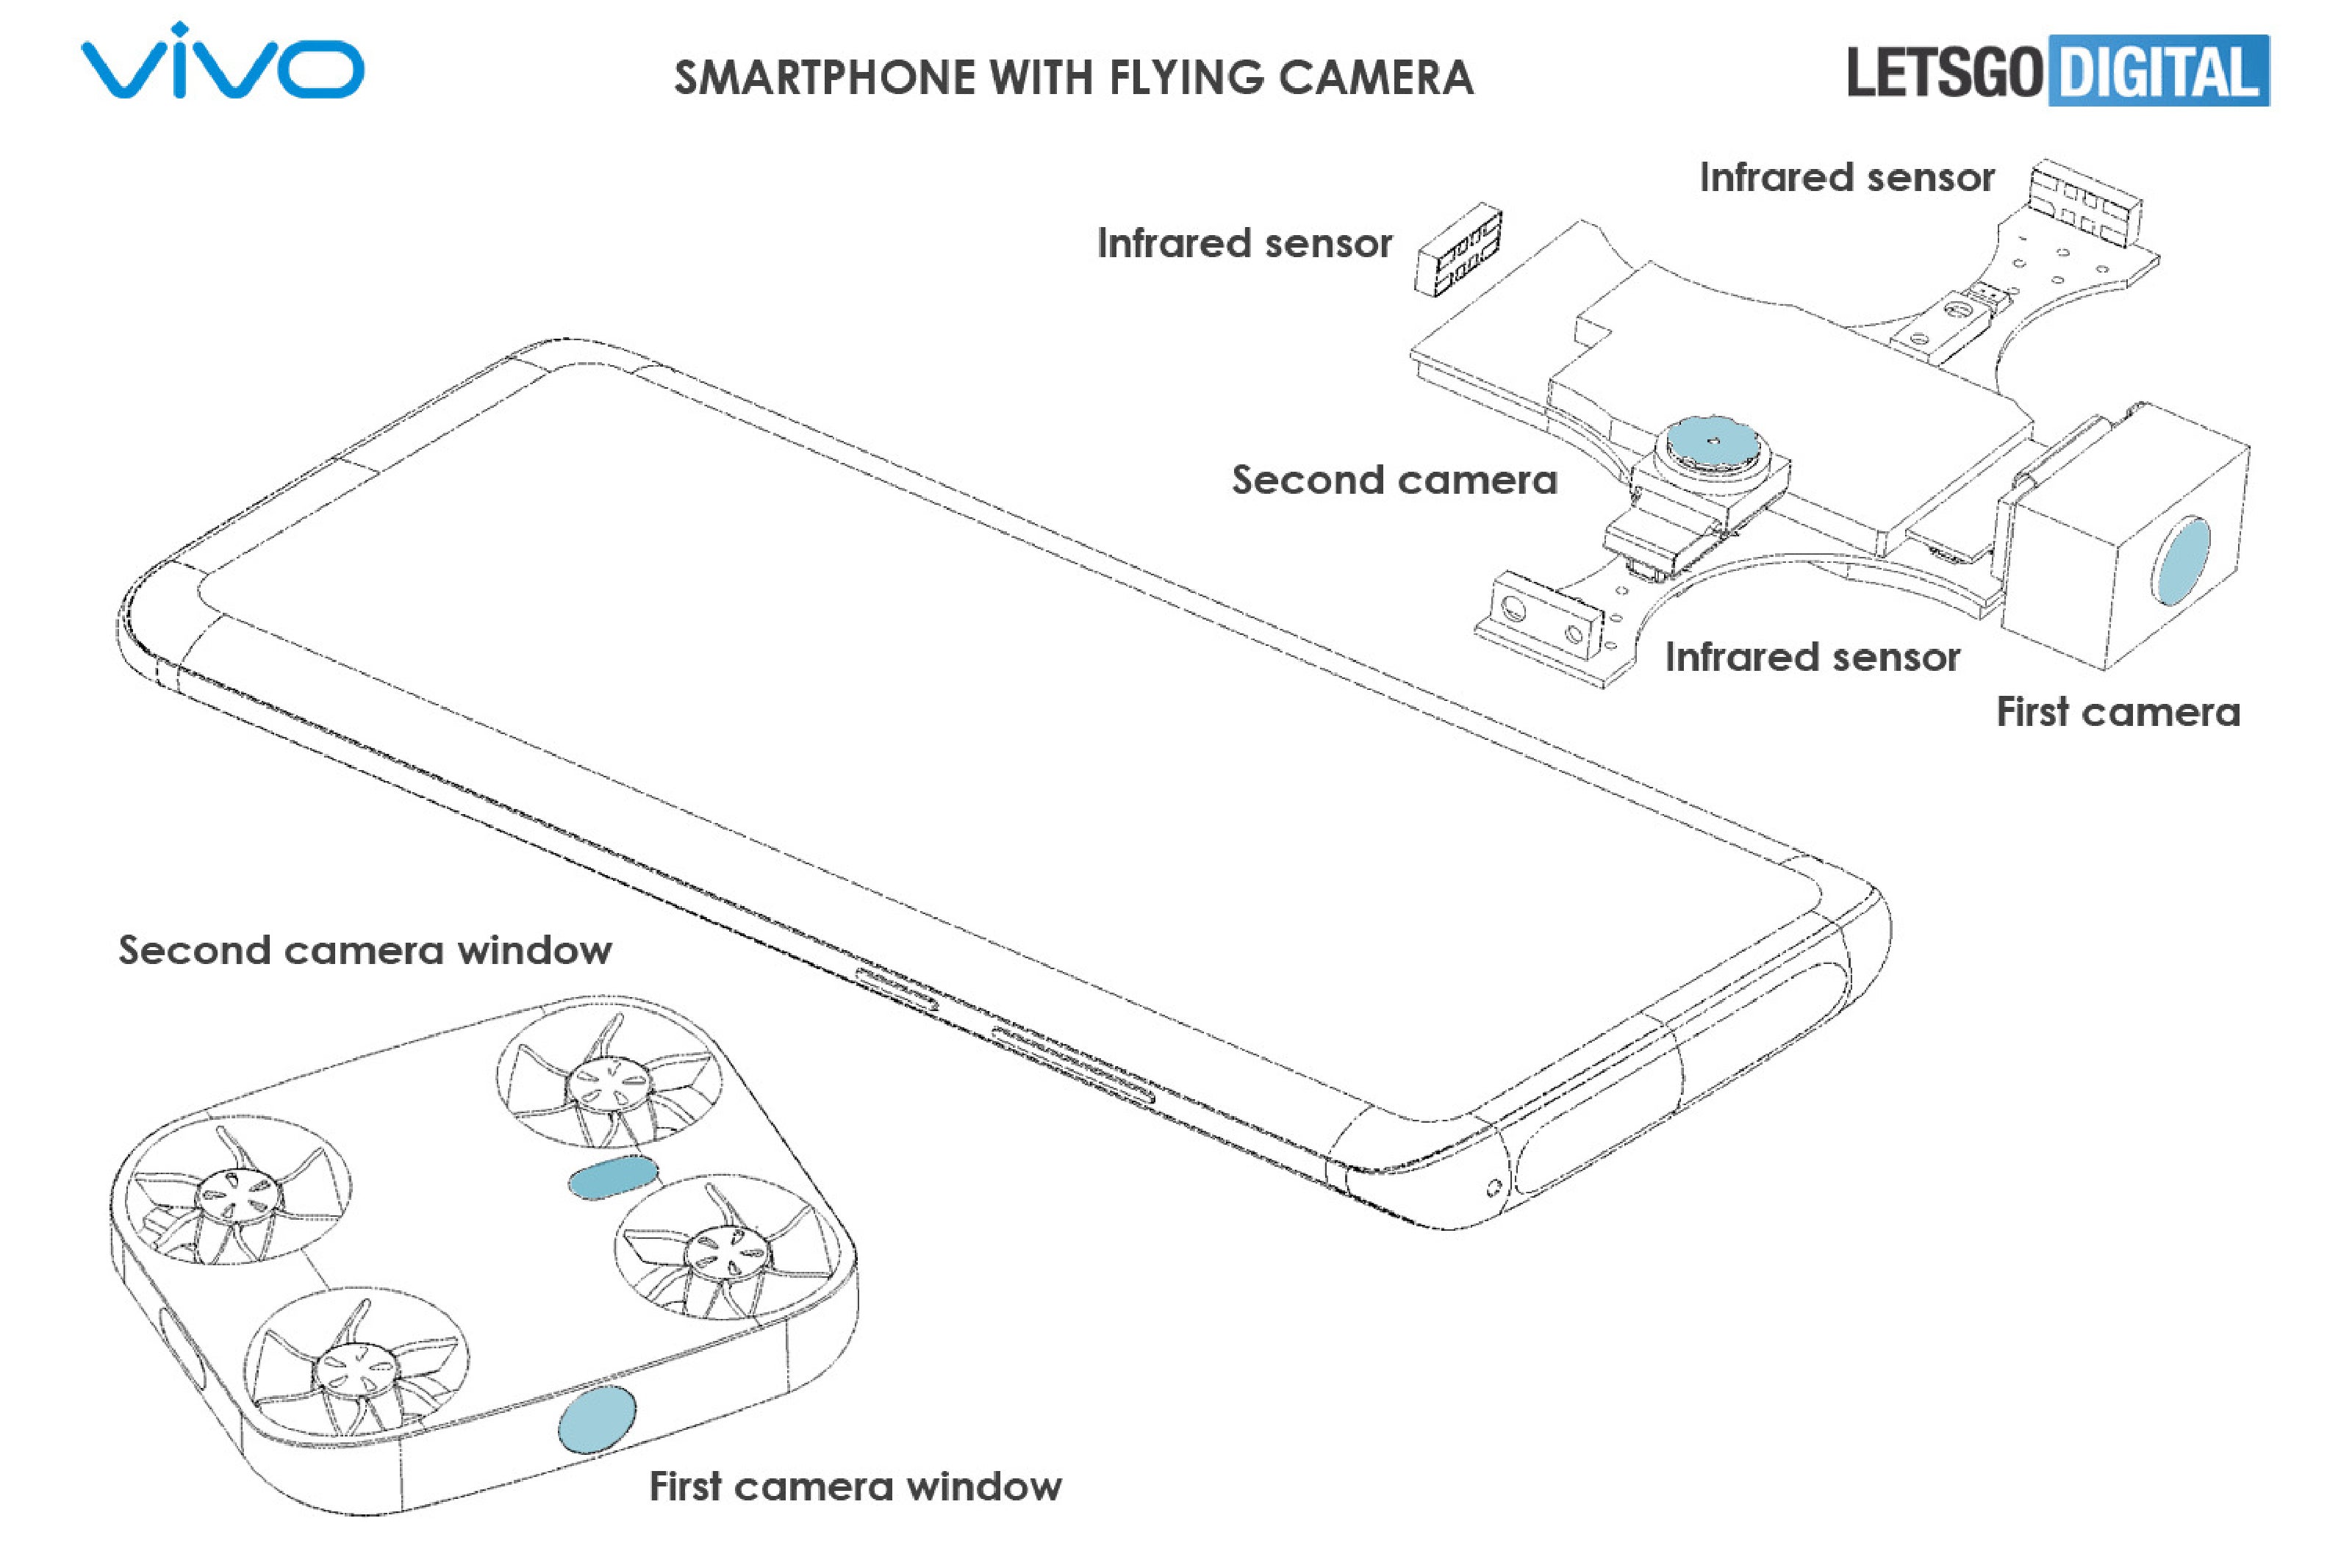 Patent images - Check these concept renders of a Vivo smartphone with a built-in camera drone